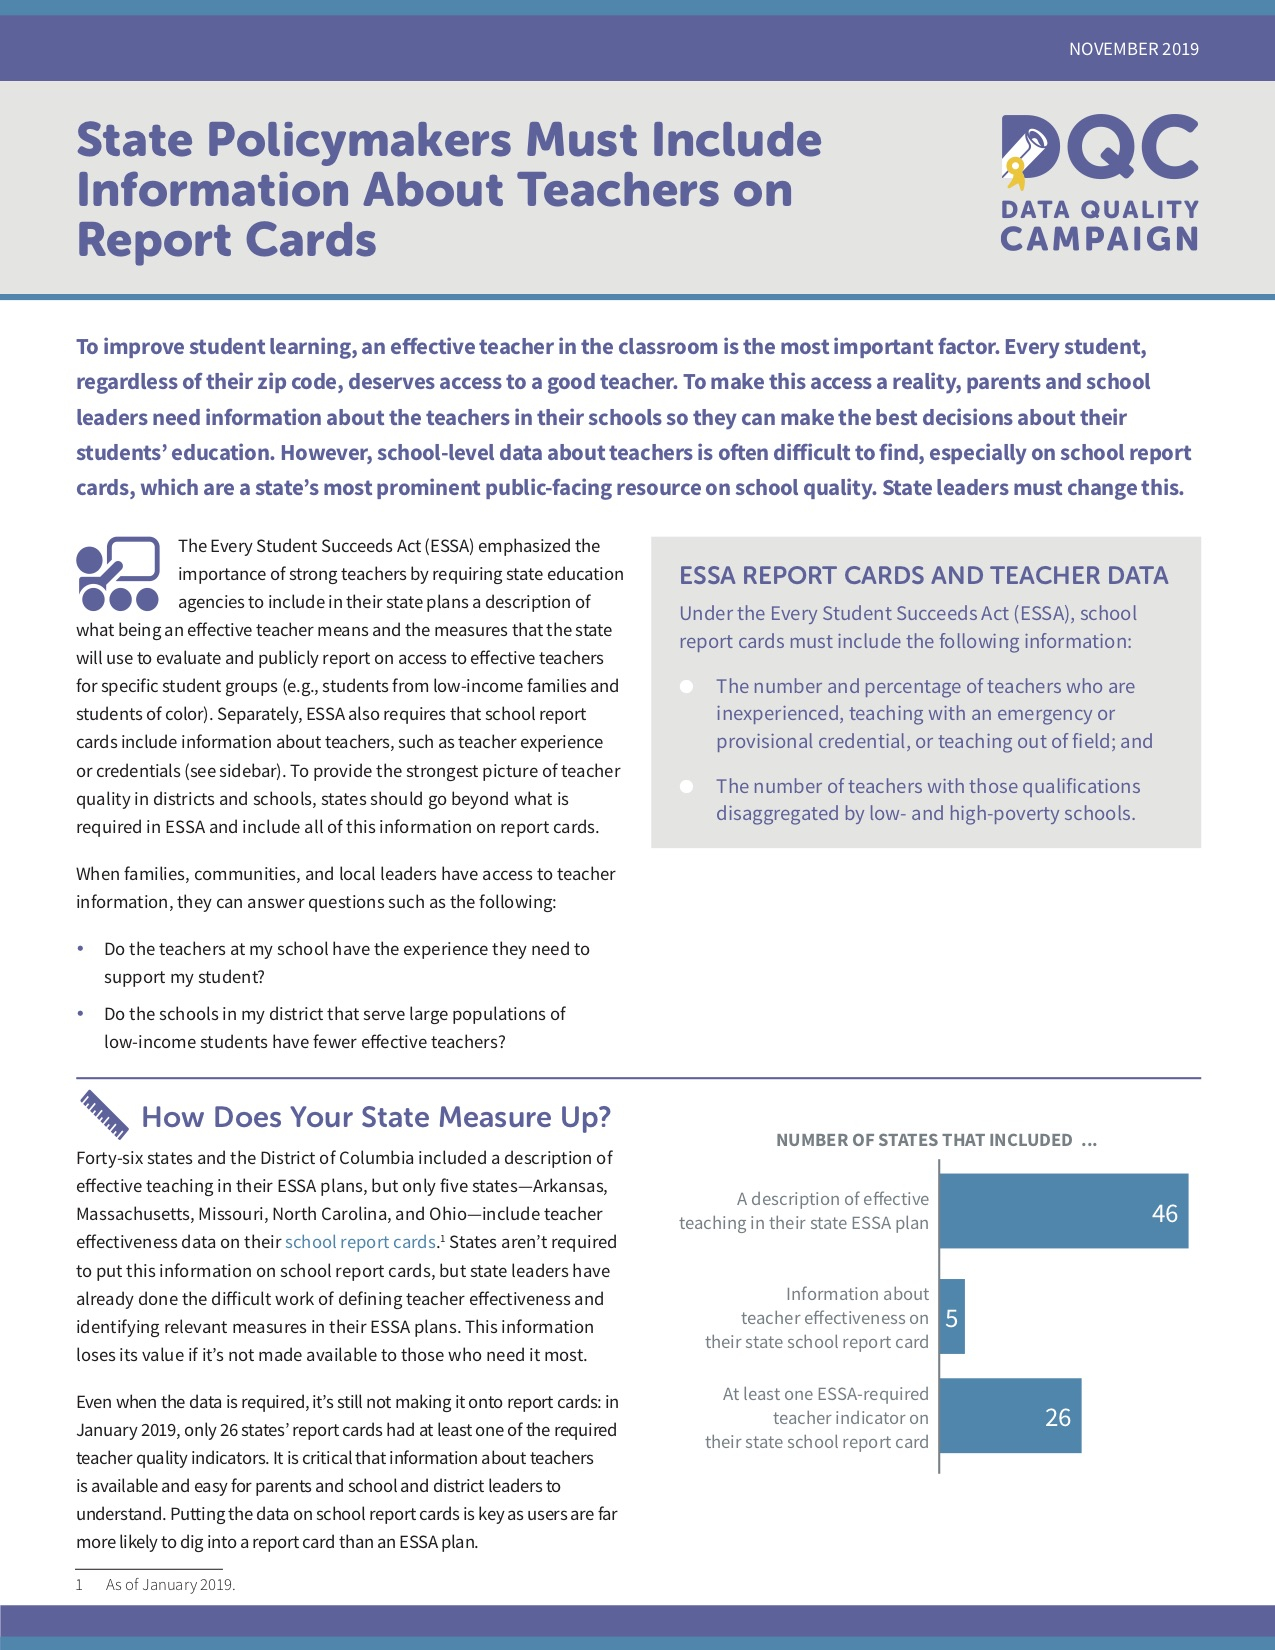 DCQ Resources Says Most State Report Cards Do Not 